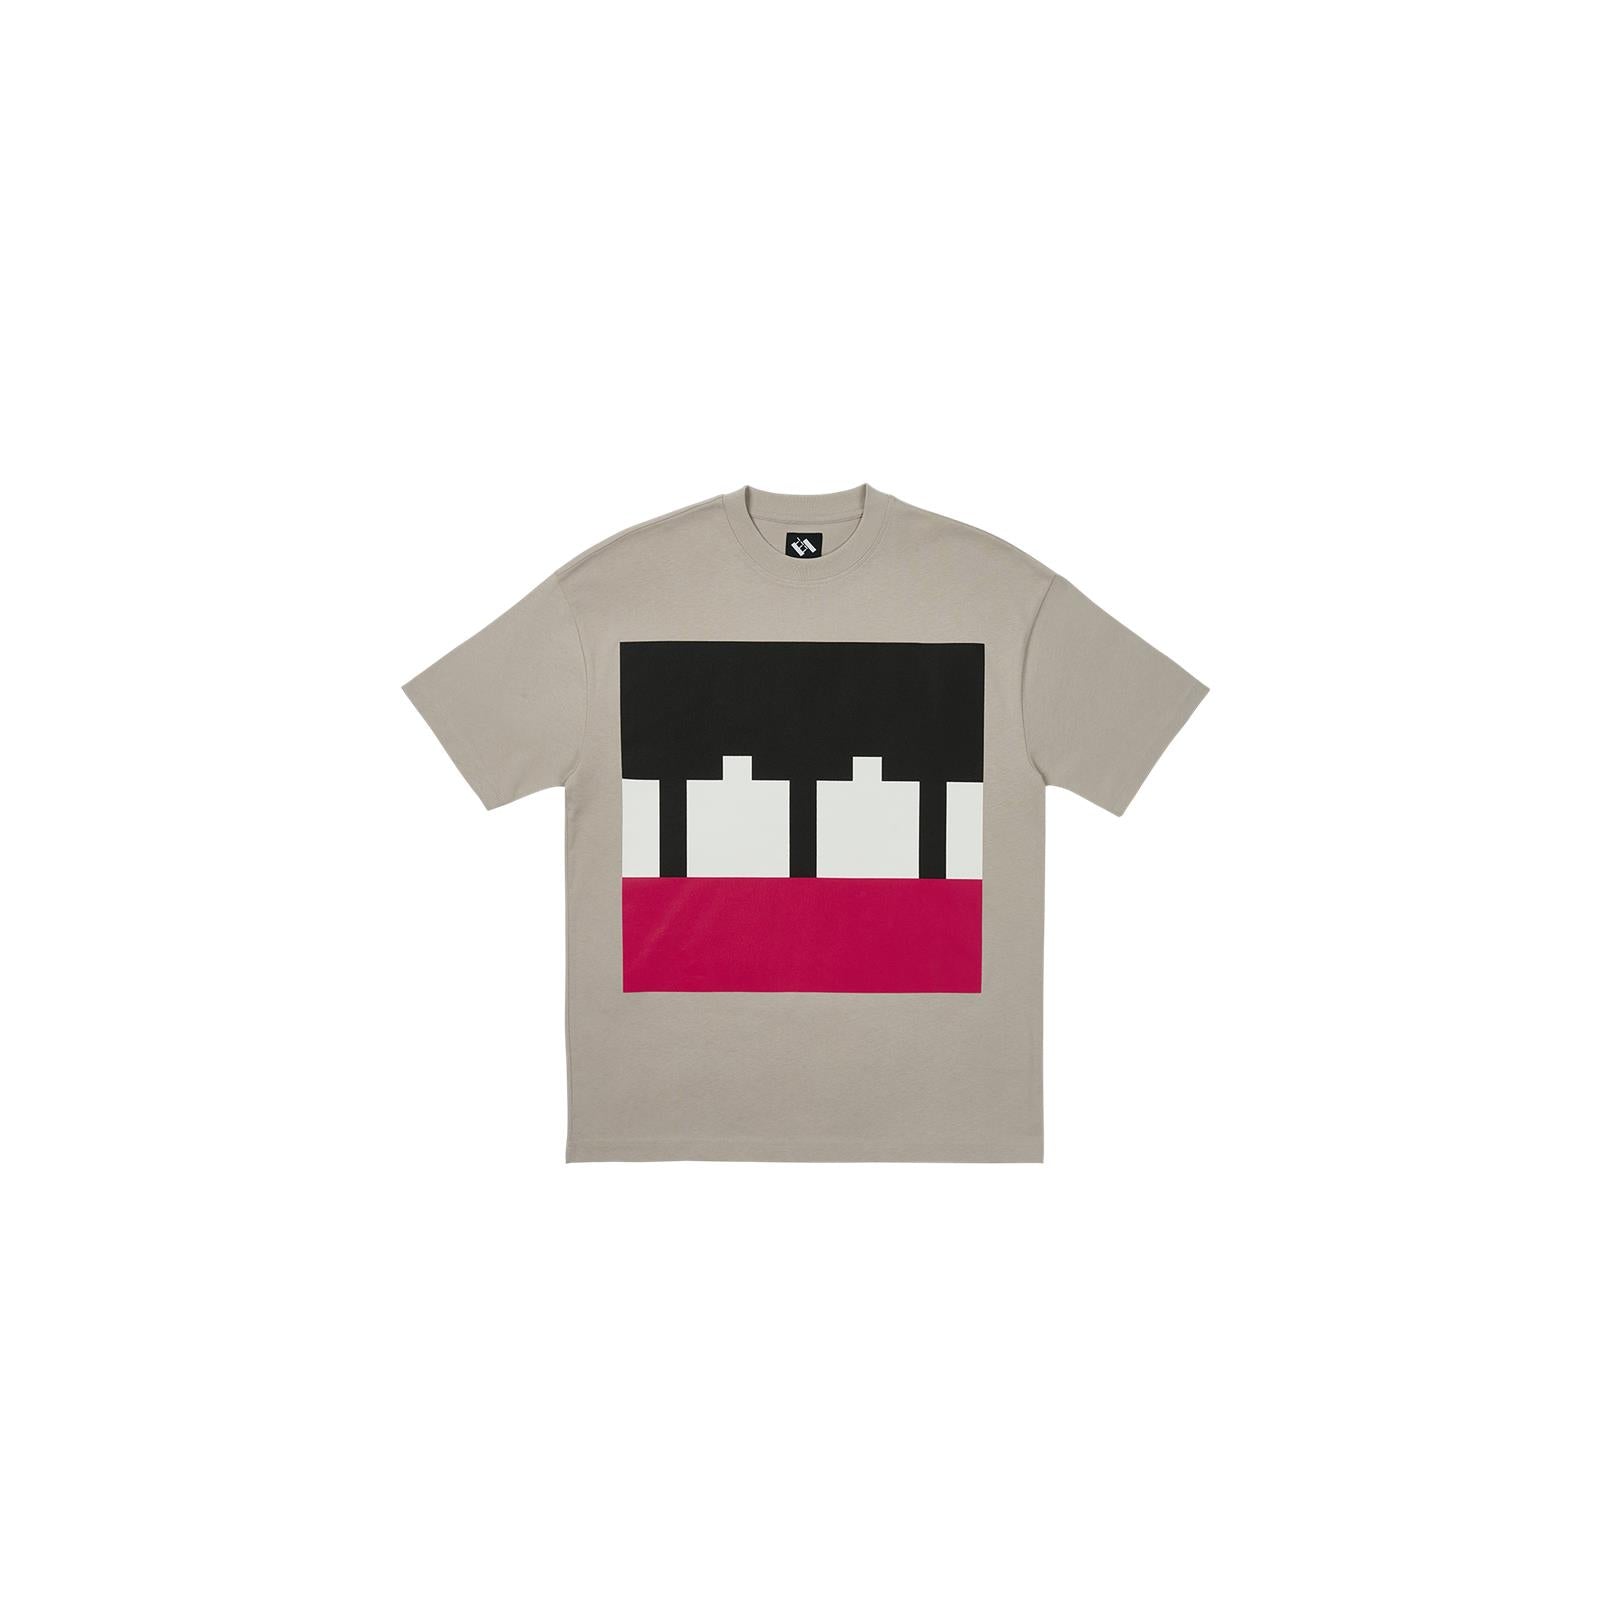 The Trilogy Tapes - TTT Block T-Shirt - Grey White Red